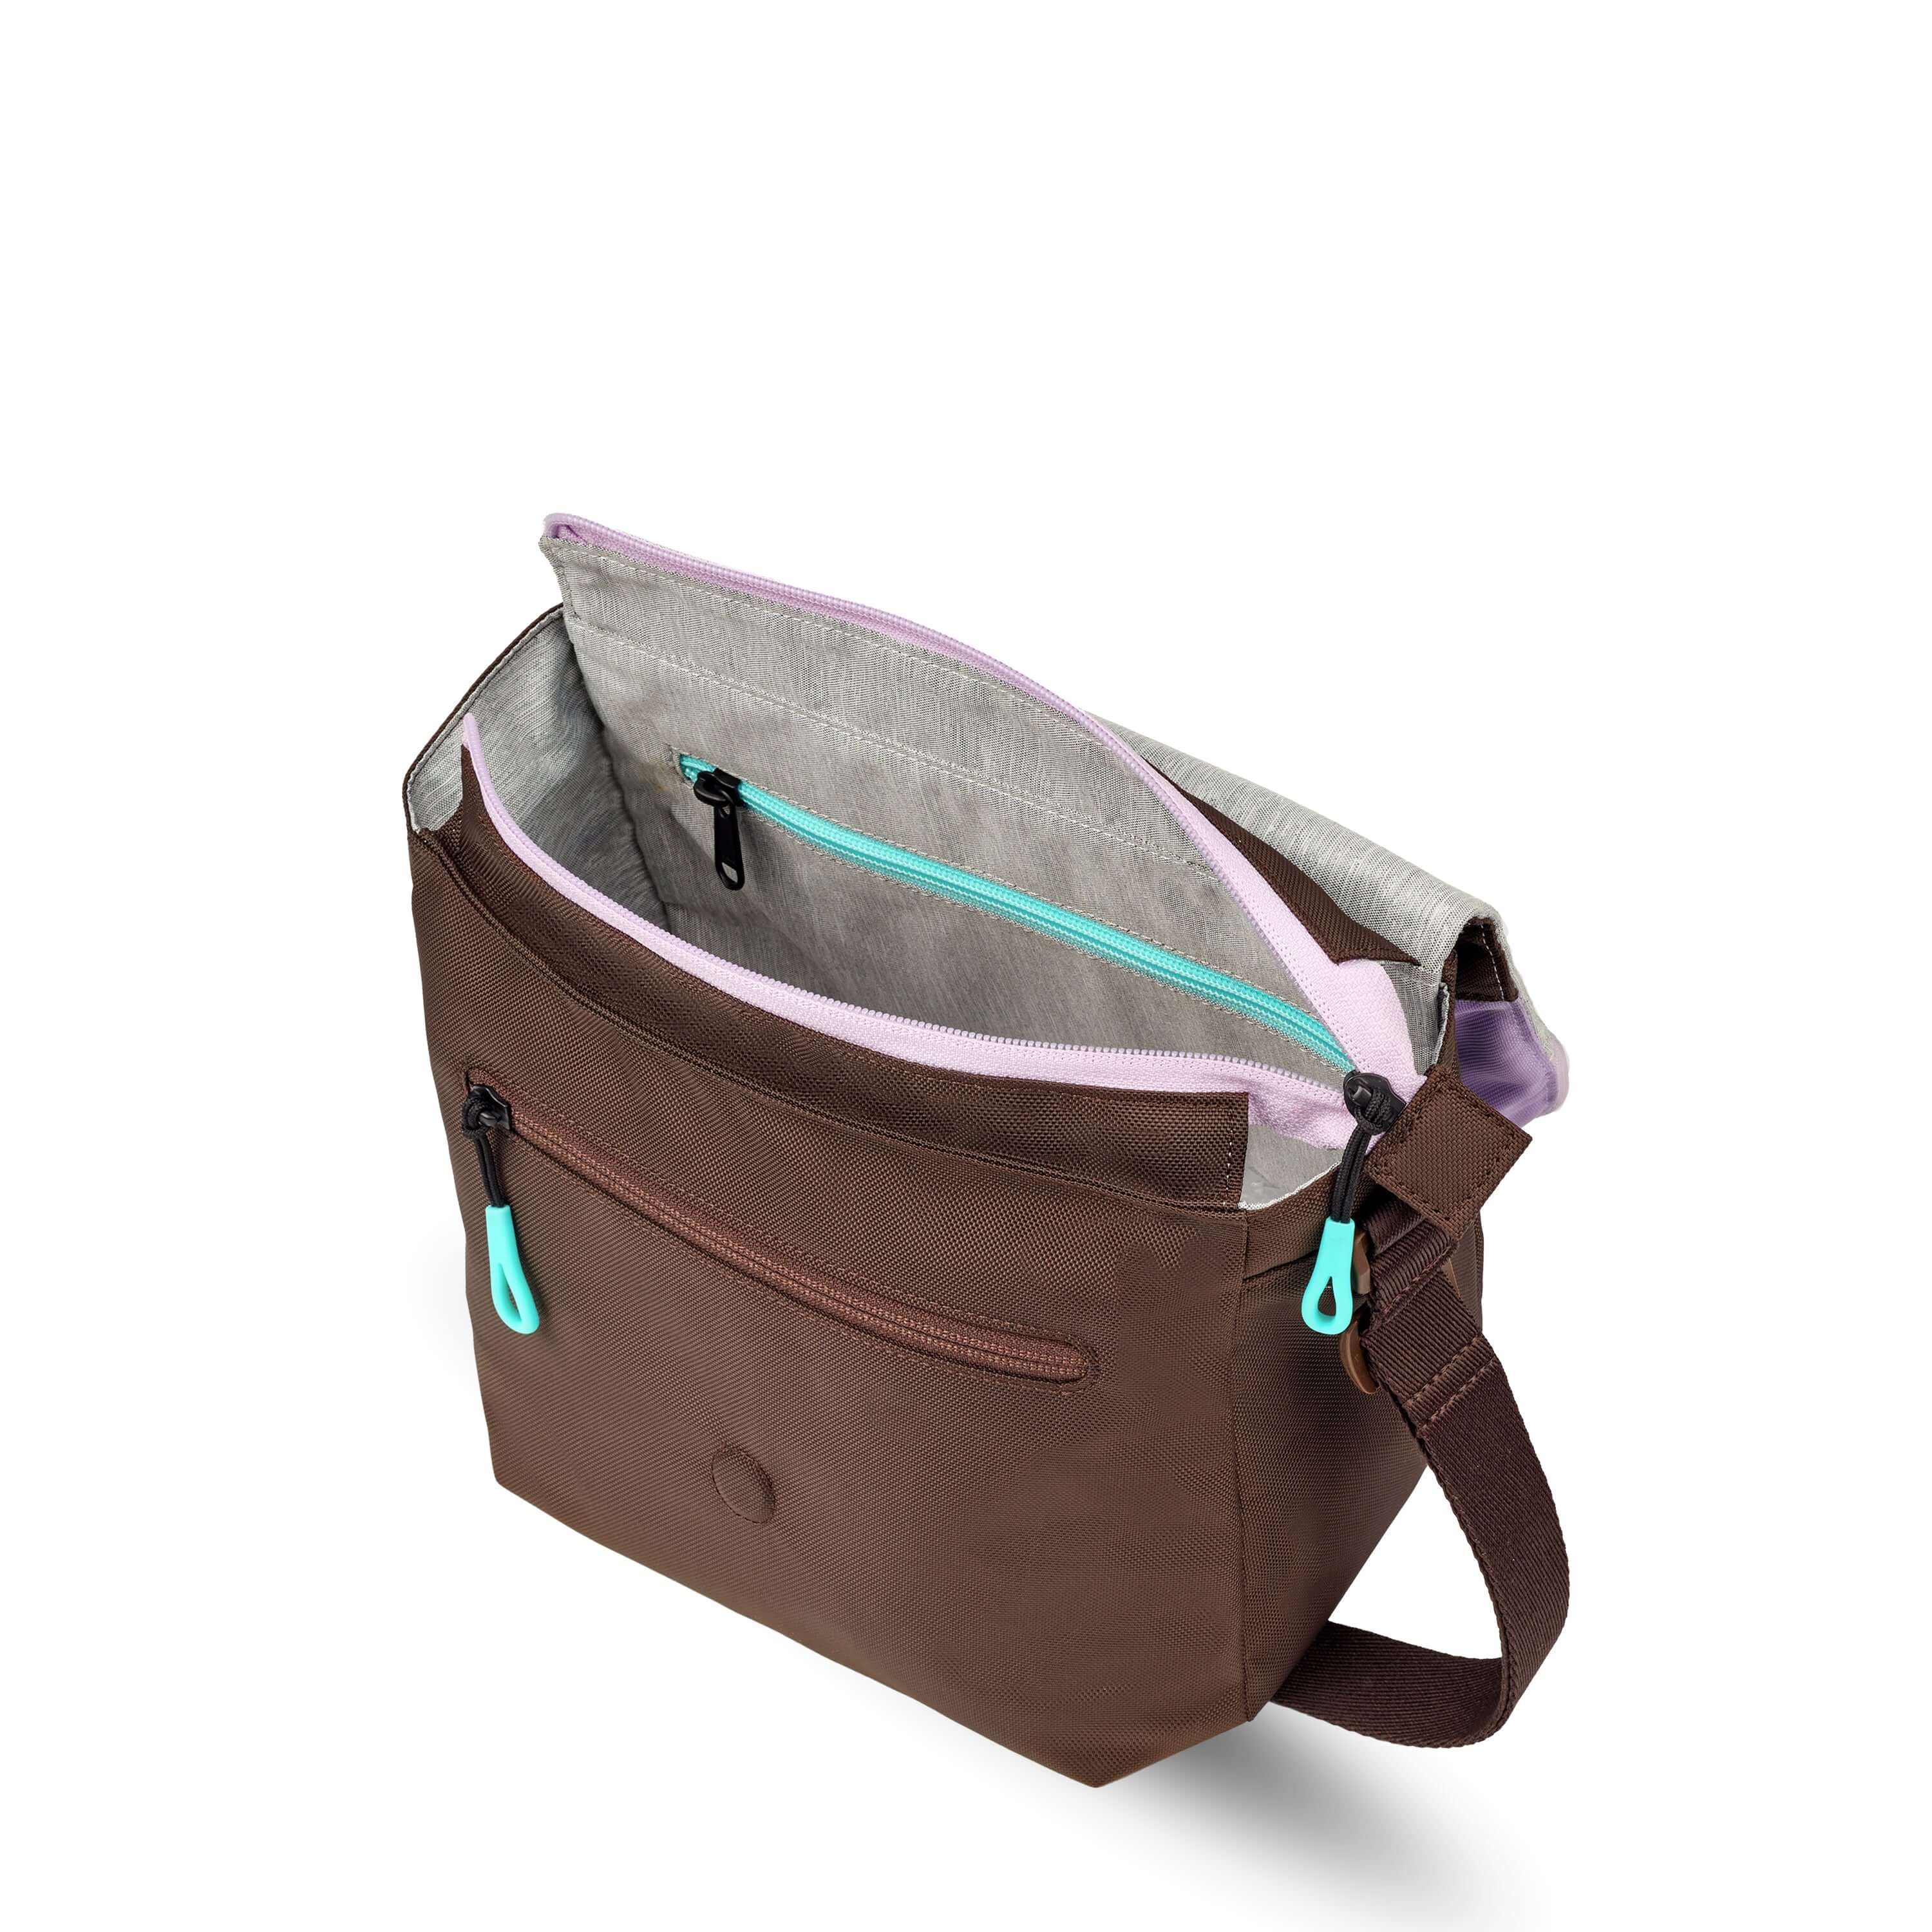 Top view of Sherpani crossbody, the Milli in Lavender. The layover flap is folded all the way back and the main zipper compartment of the bag is open. The interior is light gray and features an internal zipper pocket.